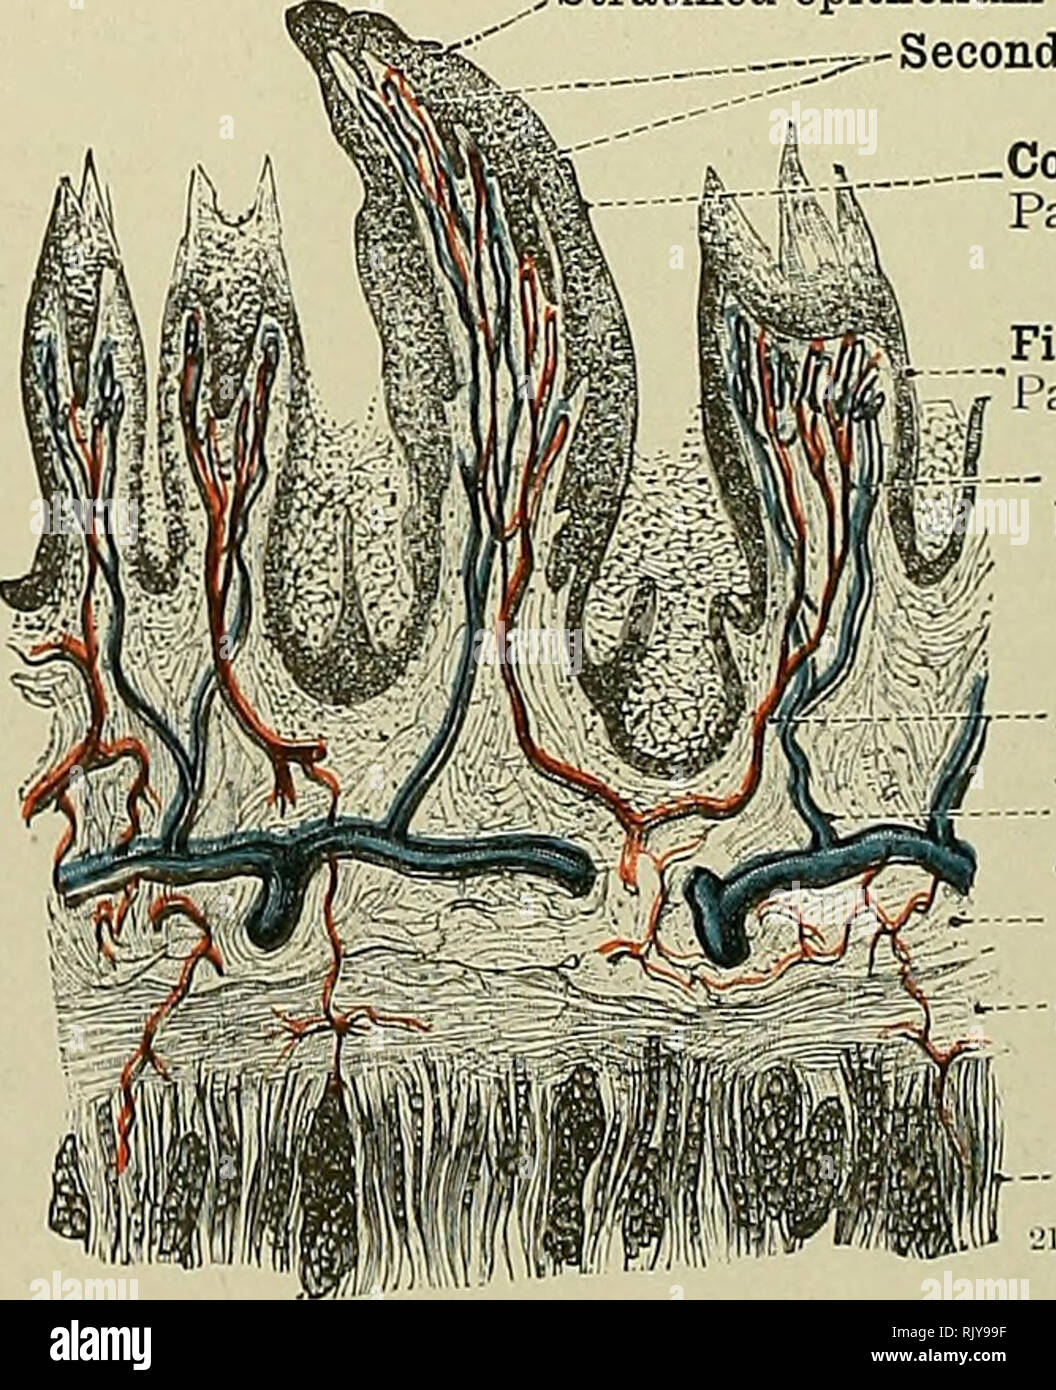 . An atlas of human anatomy for students and physicians. Anatomy. Fungiform papilla Papilla fungiformis Fig. 681.—Papilla Fungiformis, Fungiform Papilla of the Tongue, in Longitudinal Sec- tion. stratified epithelium ,^-Secondary papillae Conical papilla Papilla conica. Filiform papilla Papilla filiformis - Capillary bloodvessels Arteriole Venule Areolar tissue of the mucous membrane (corium)—I^amina propria mucosa; Submucous fibrous stratum, or fascia of the tongue Fascia lingua; Muscle Fig. 682.—Papilla Conica, Conical Papilla of THE Tongue, among Filiform Papilla, in Longitudinal Section. T Stock Photo